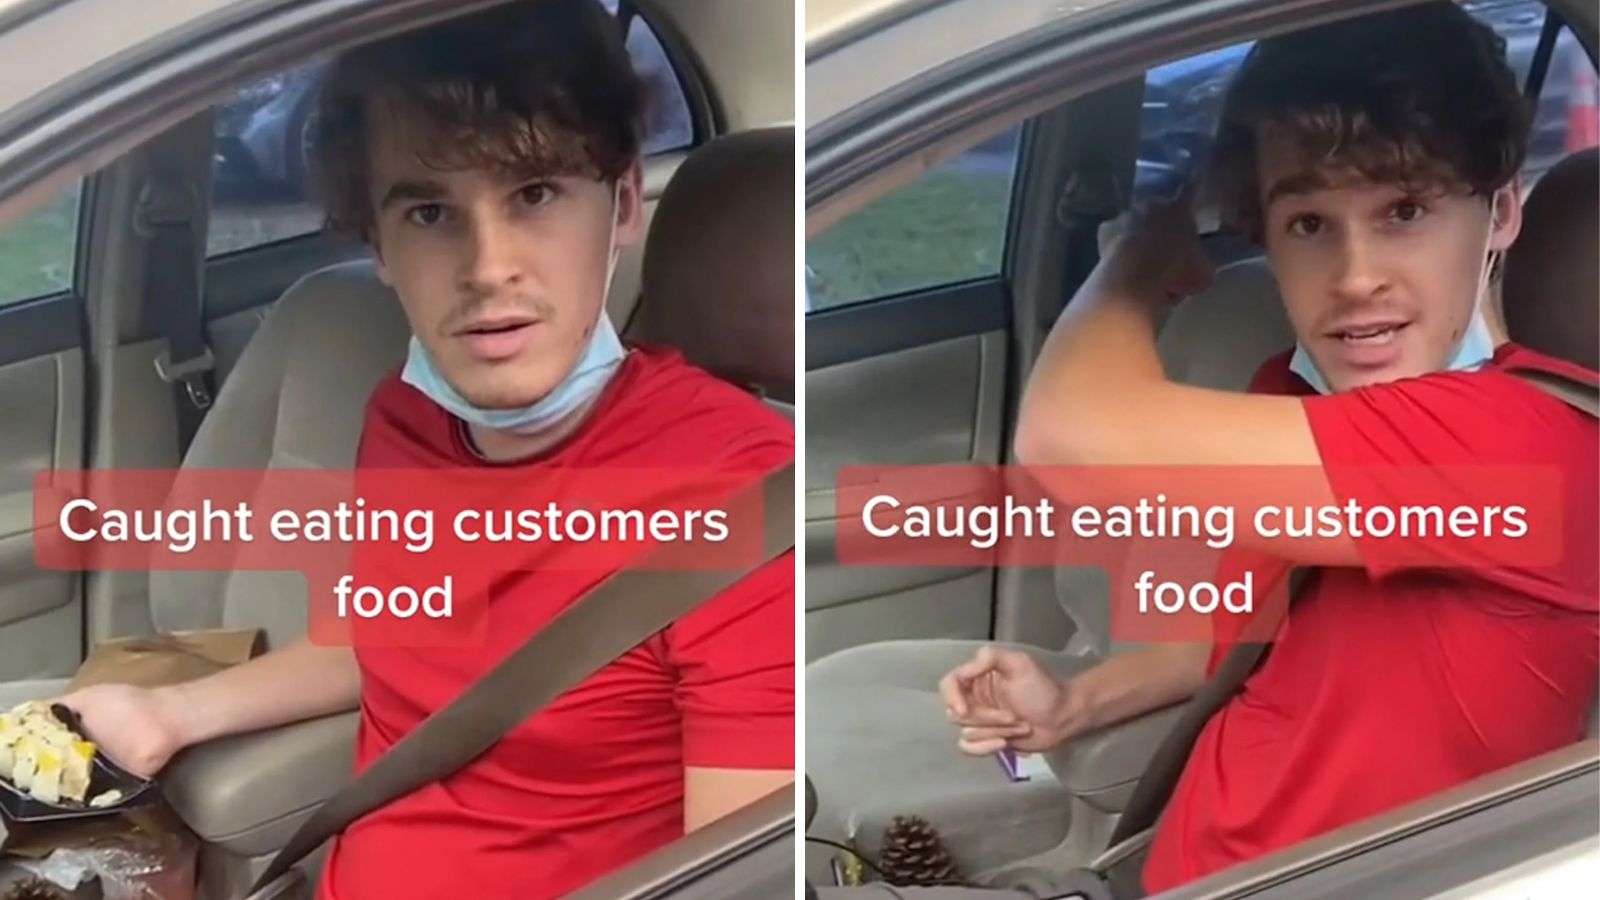 Customer confronts DoorDash driver after catching him eating her food